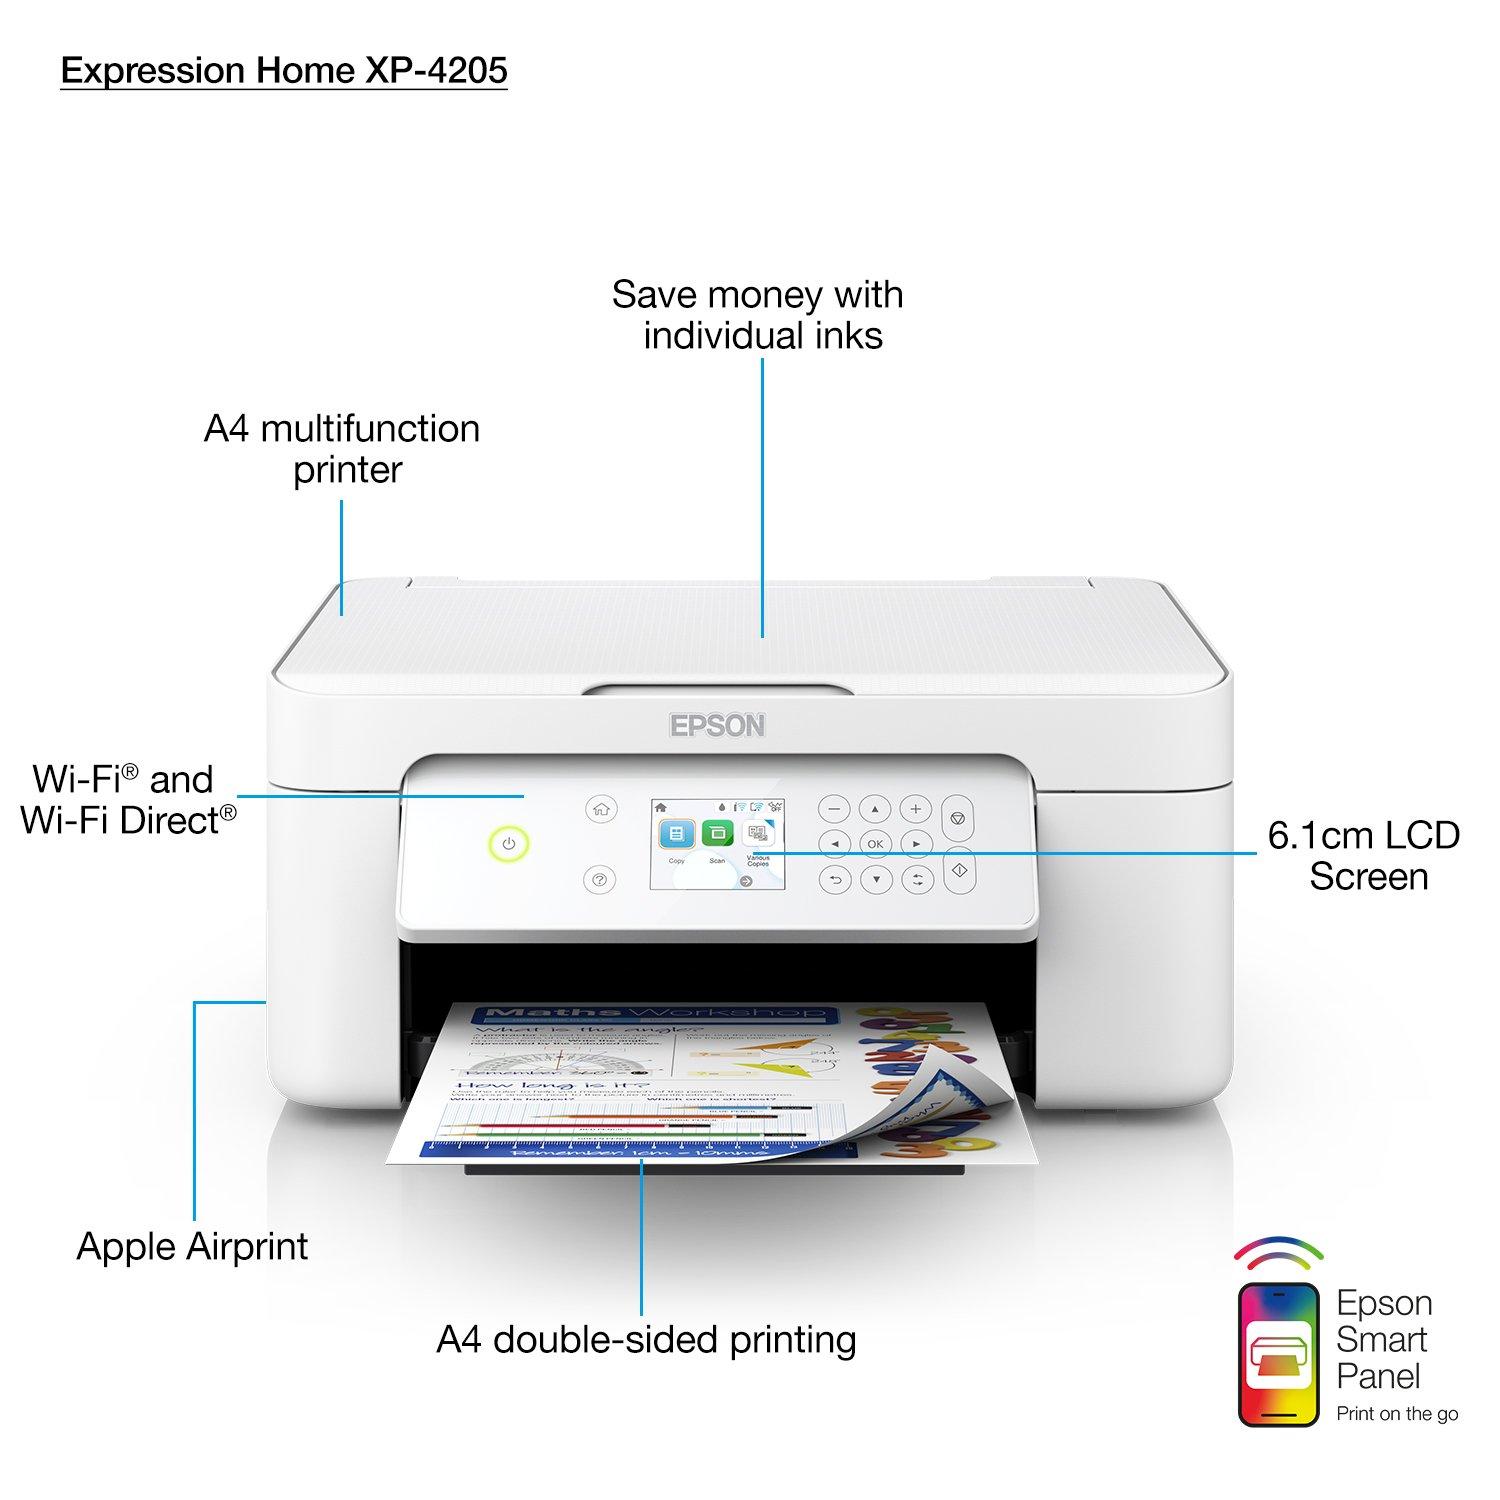 Epson Expression Home XP-4100 specifications